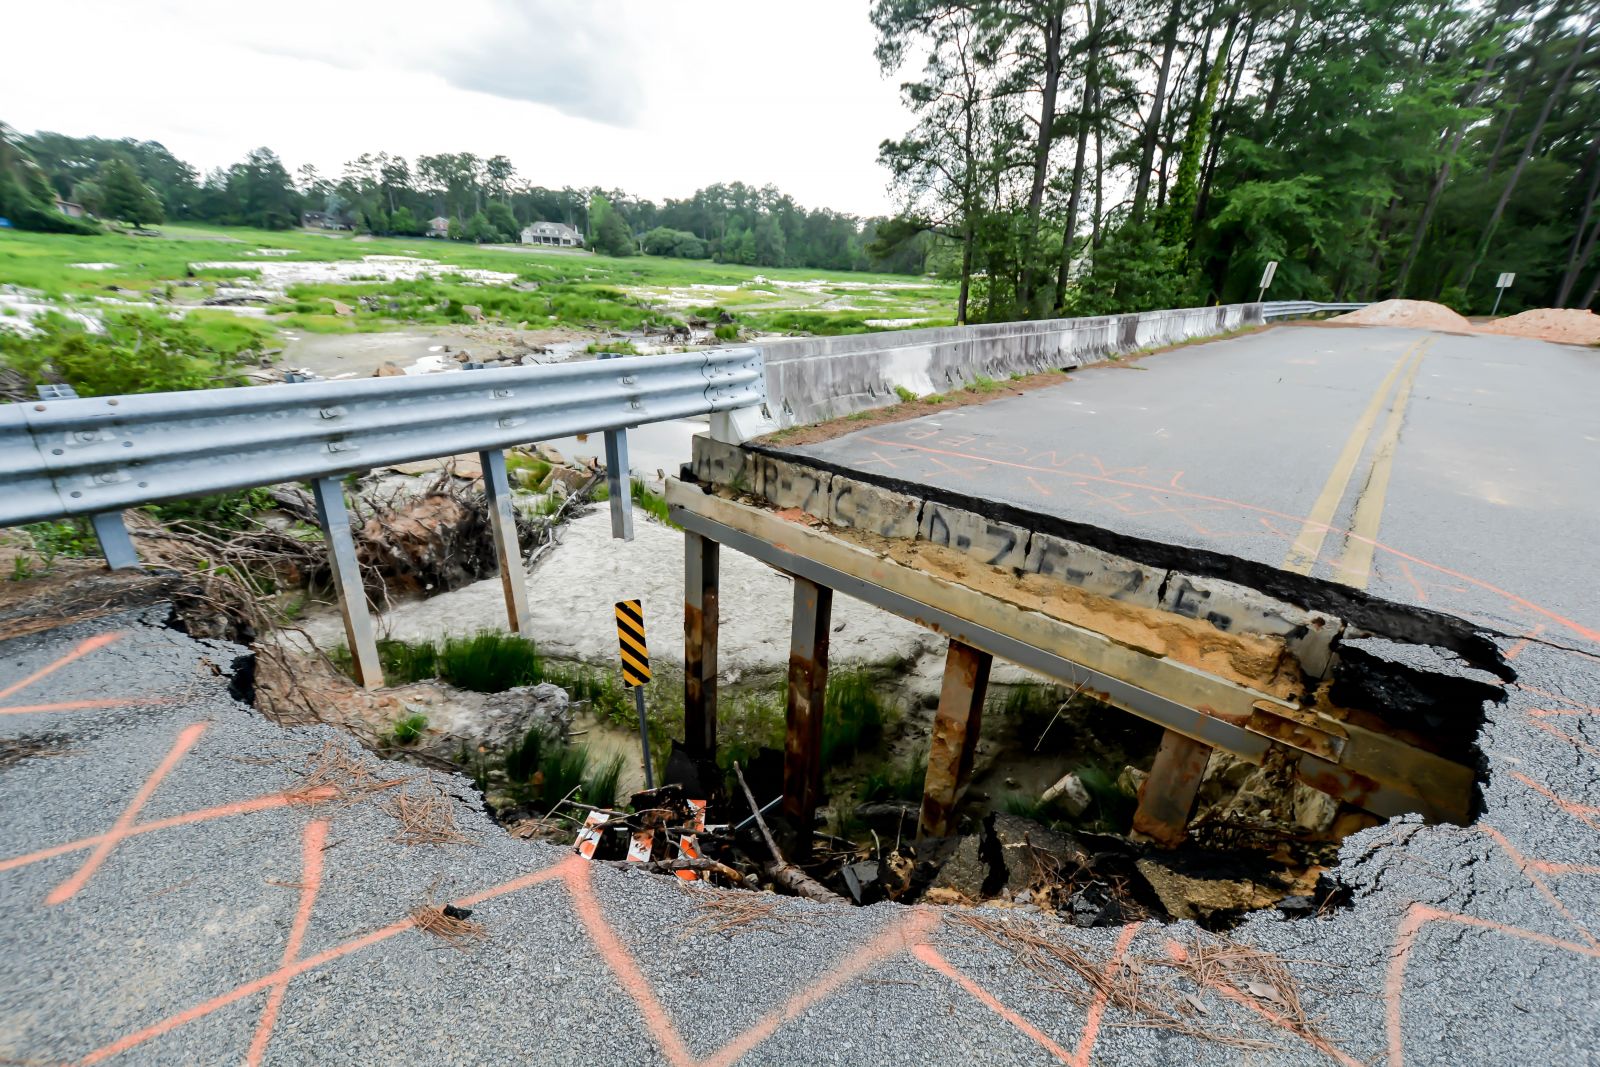 The bridge at Rockyford Lake in Forest Acres was damaged during the 2015 Columbia flood. New legislation passed by the S.C. General Assembly in September is aimed at giving homeowners more choices in purchasing flood insurance. (Photo/File)